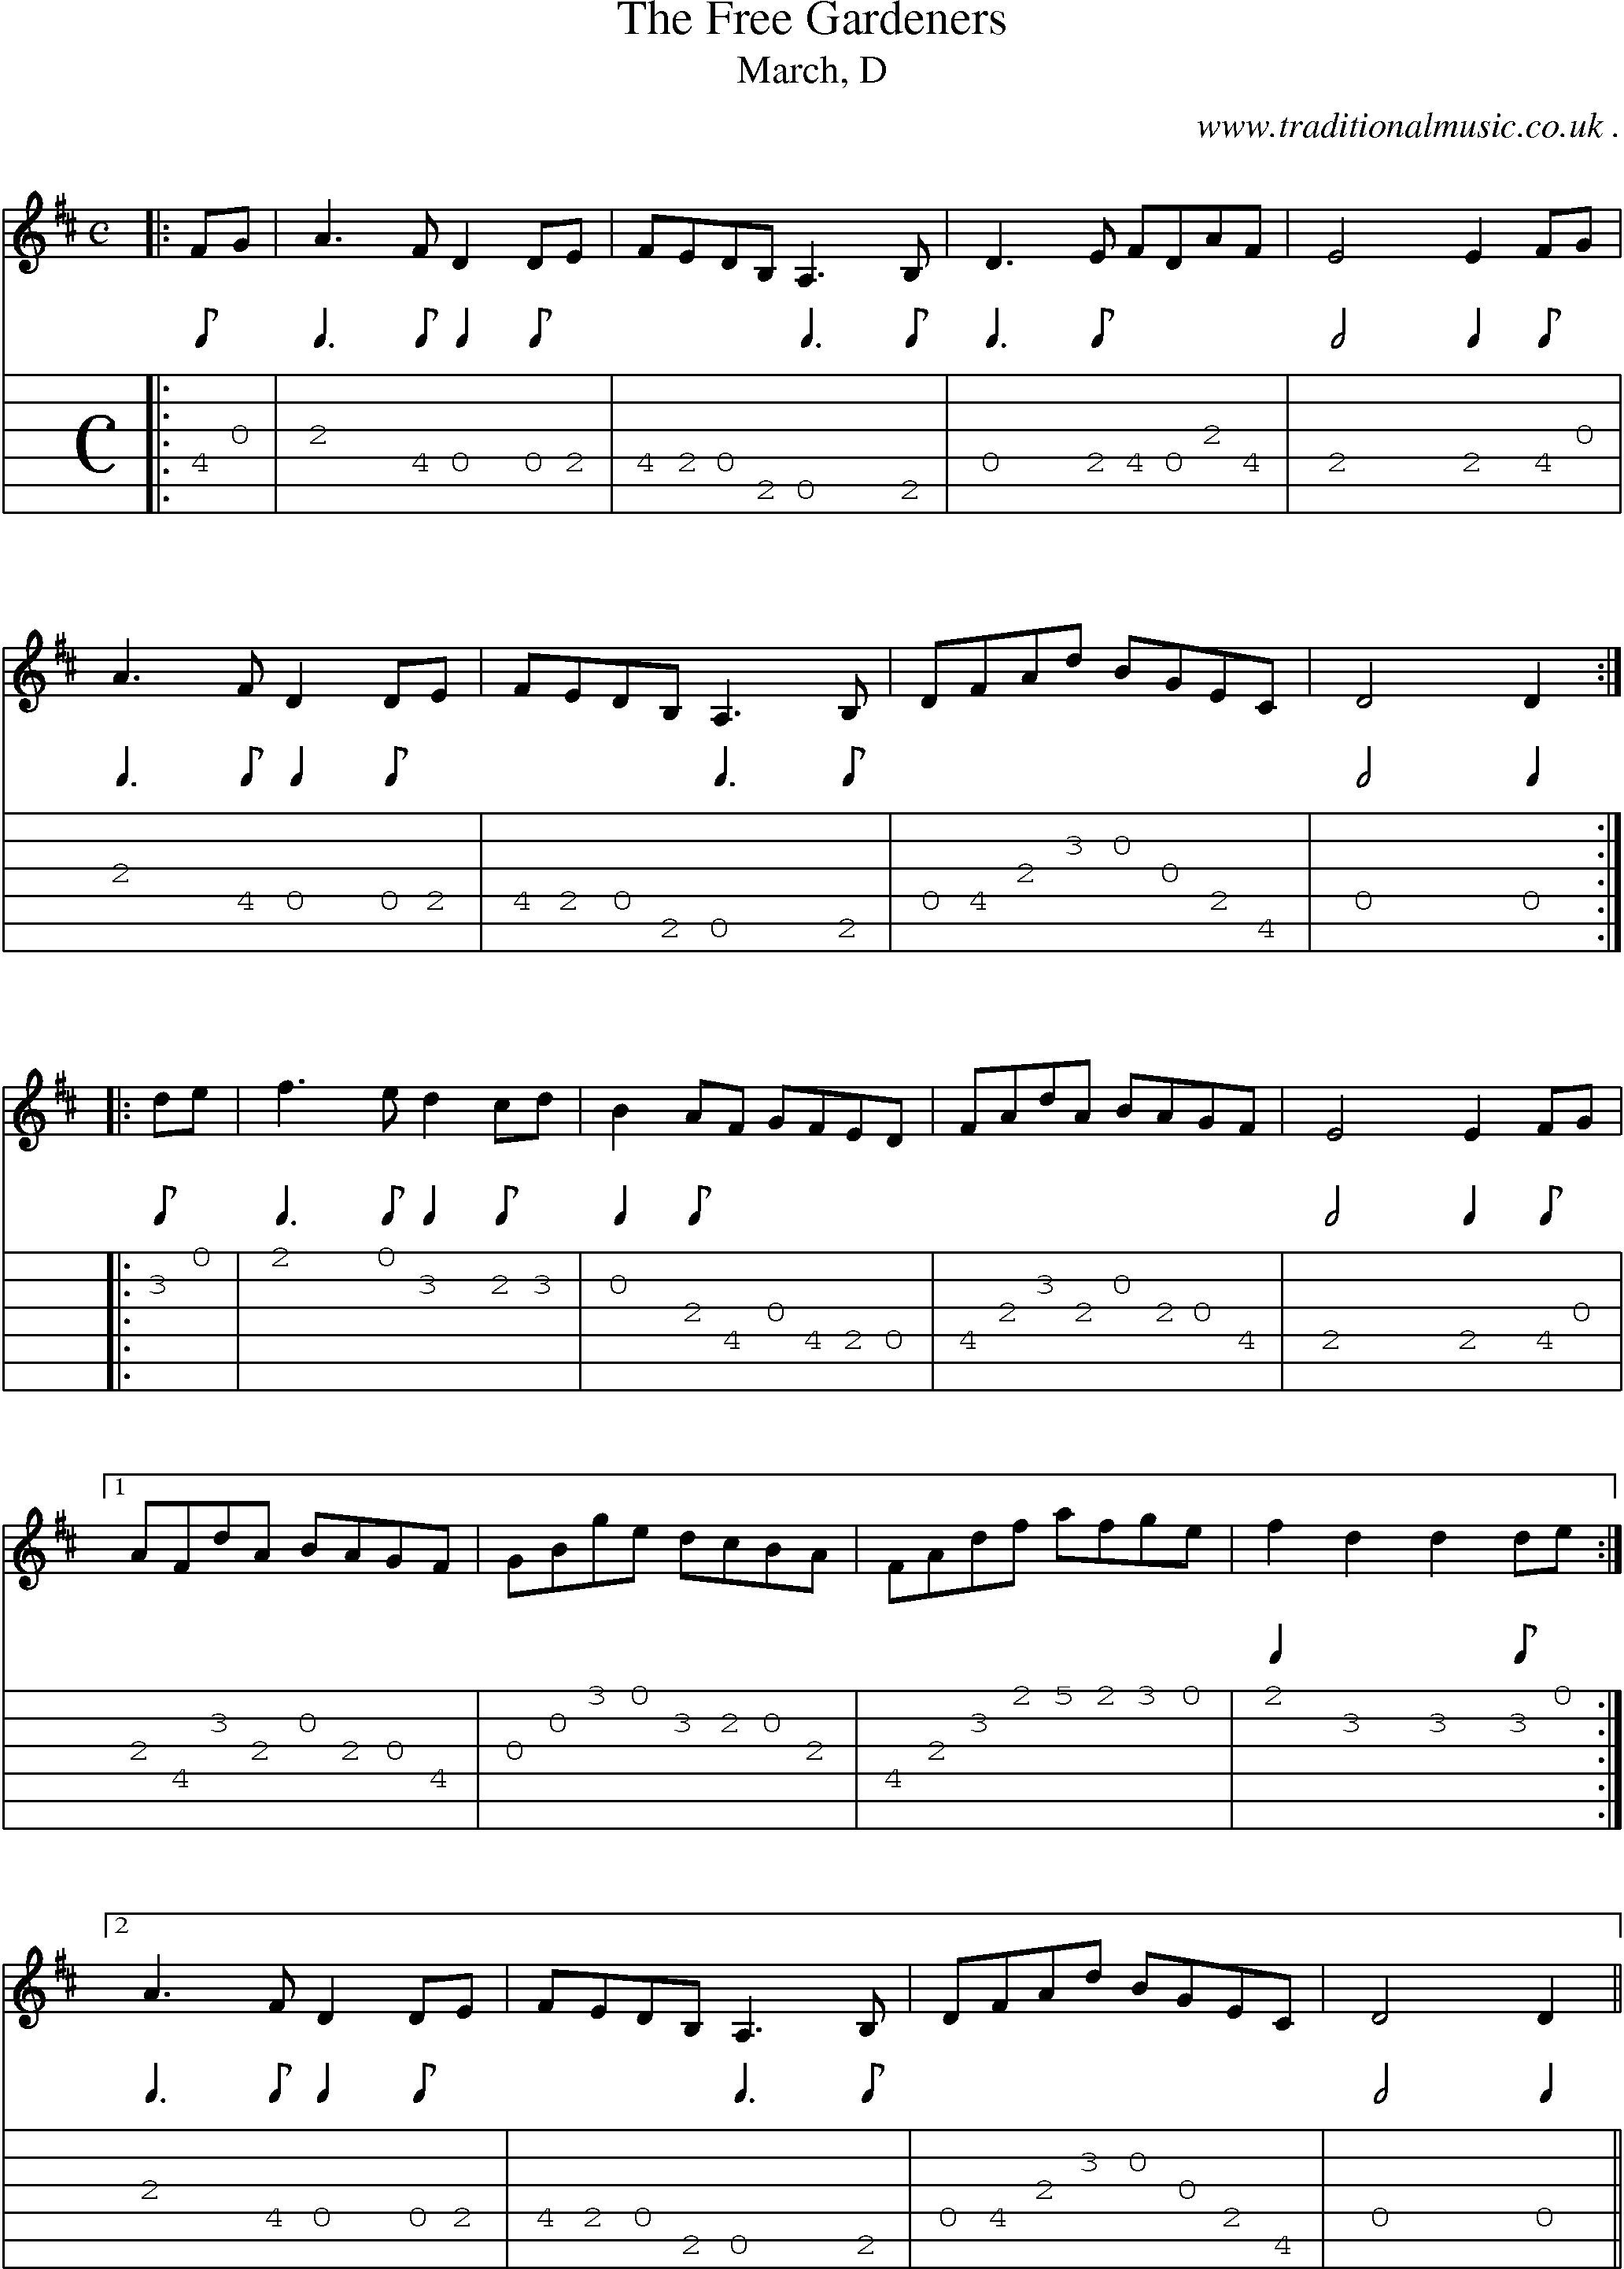 Sheet-music  score, Chords and Guitar Tabs for The Free Gardeners